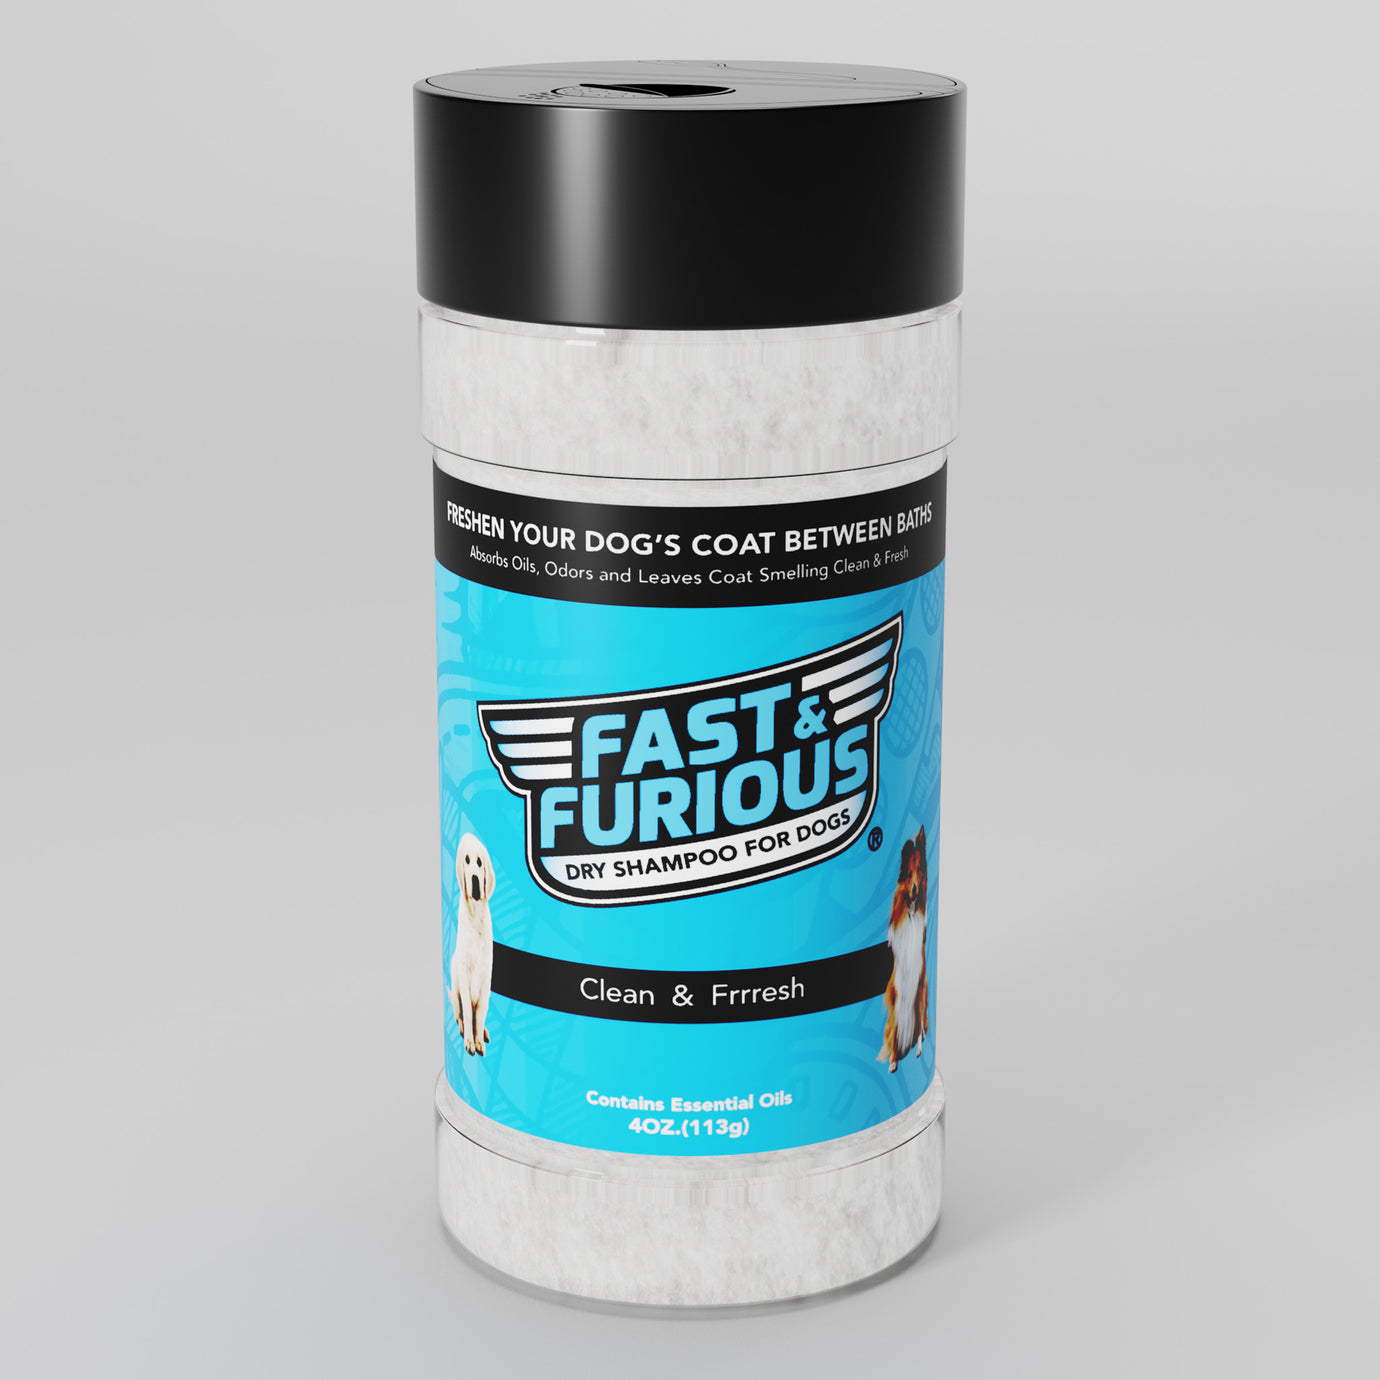 Fast & Furious Dry Shampoo For Dogs